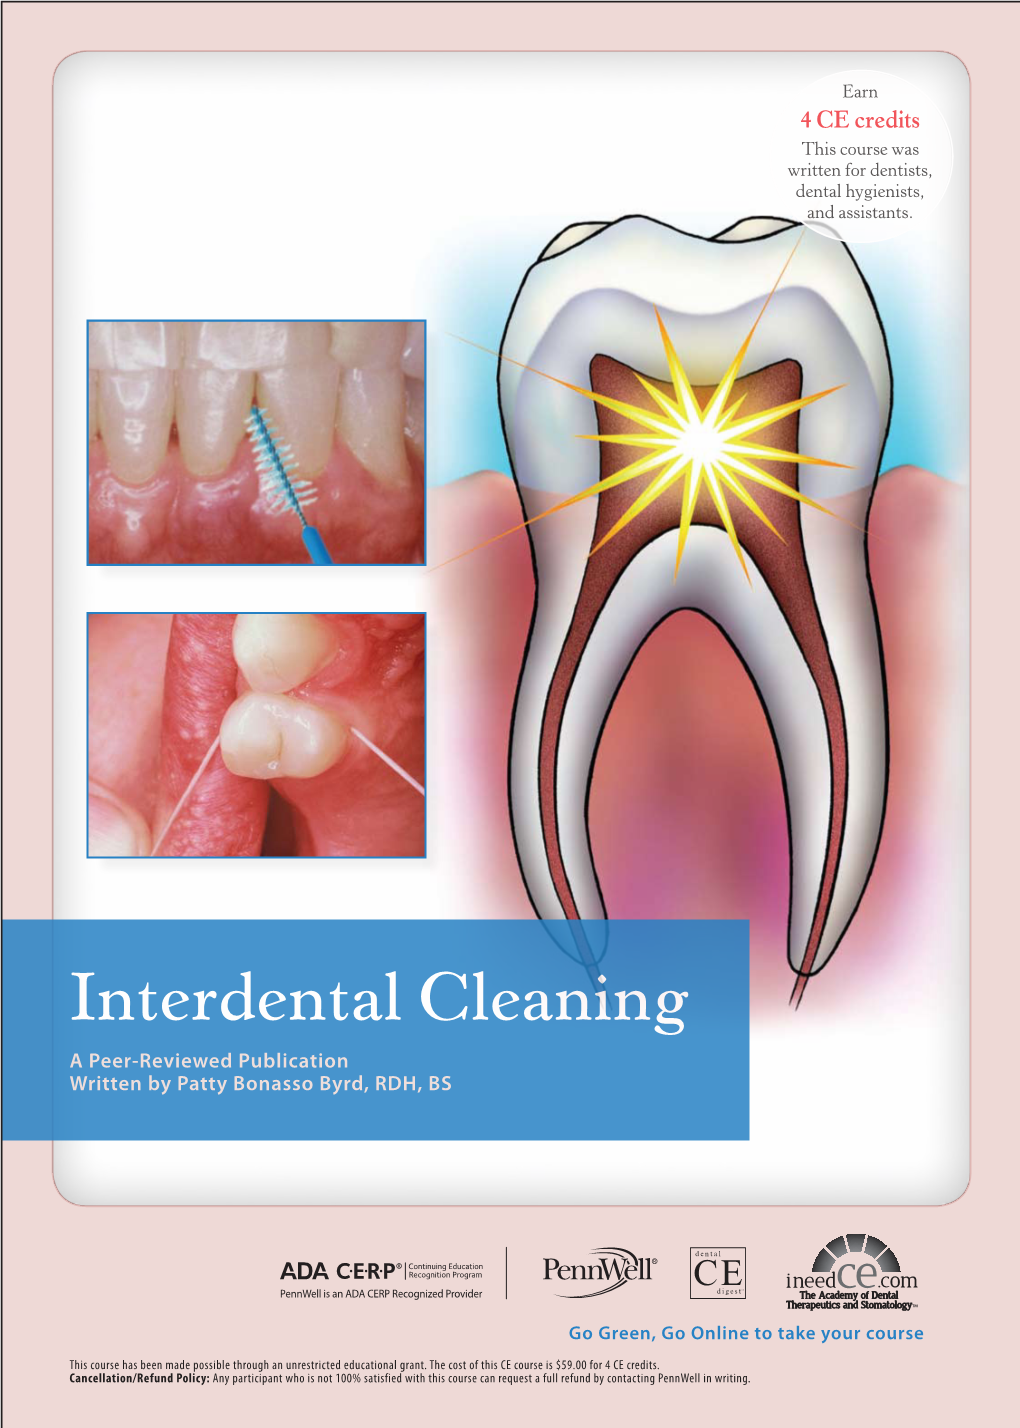 Interdental Cleaning a Peer-Reviewed Publication Written by Patty Bonasso Byrd, RDH, BS